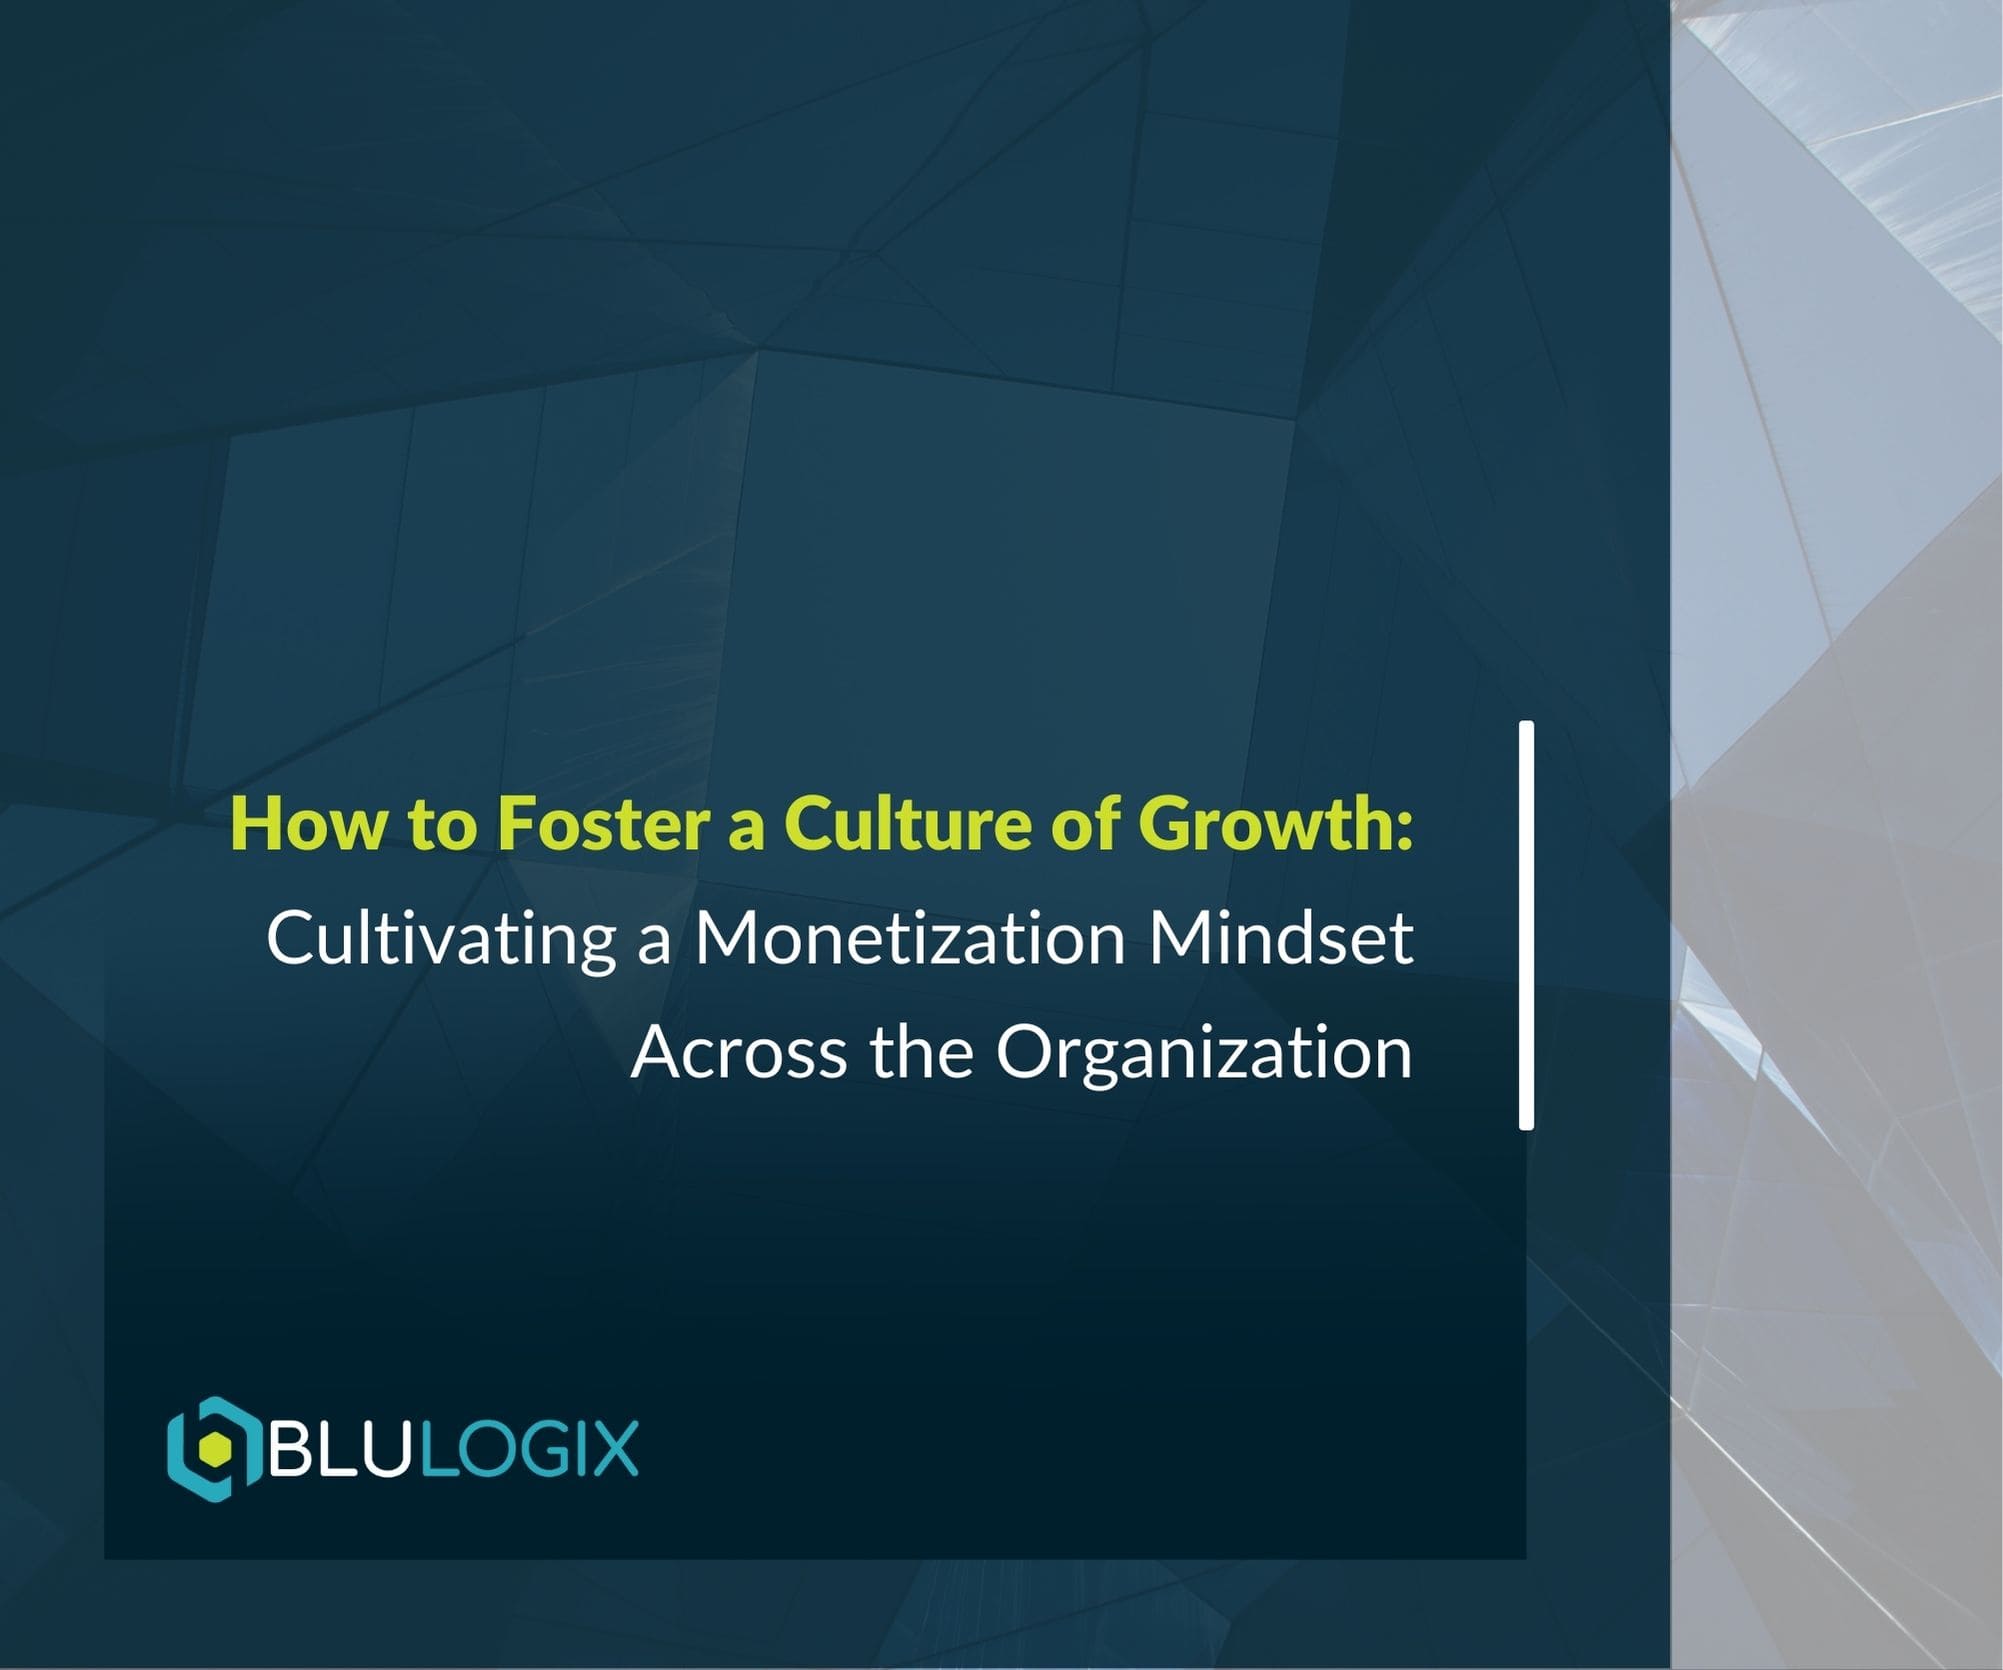 How to Foster a Culture of Growth Cultivating a Monetization Mindset Across the Organization